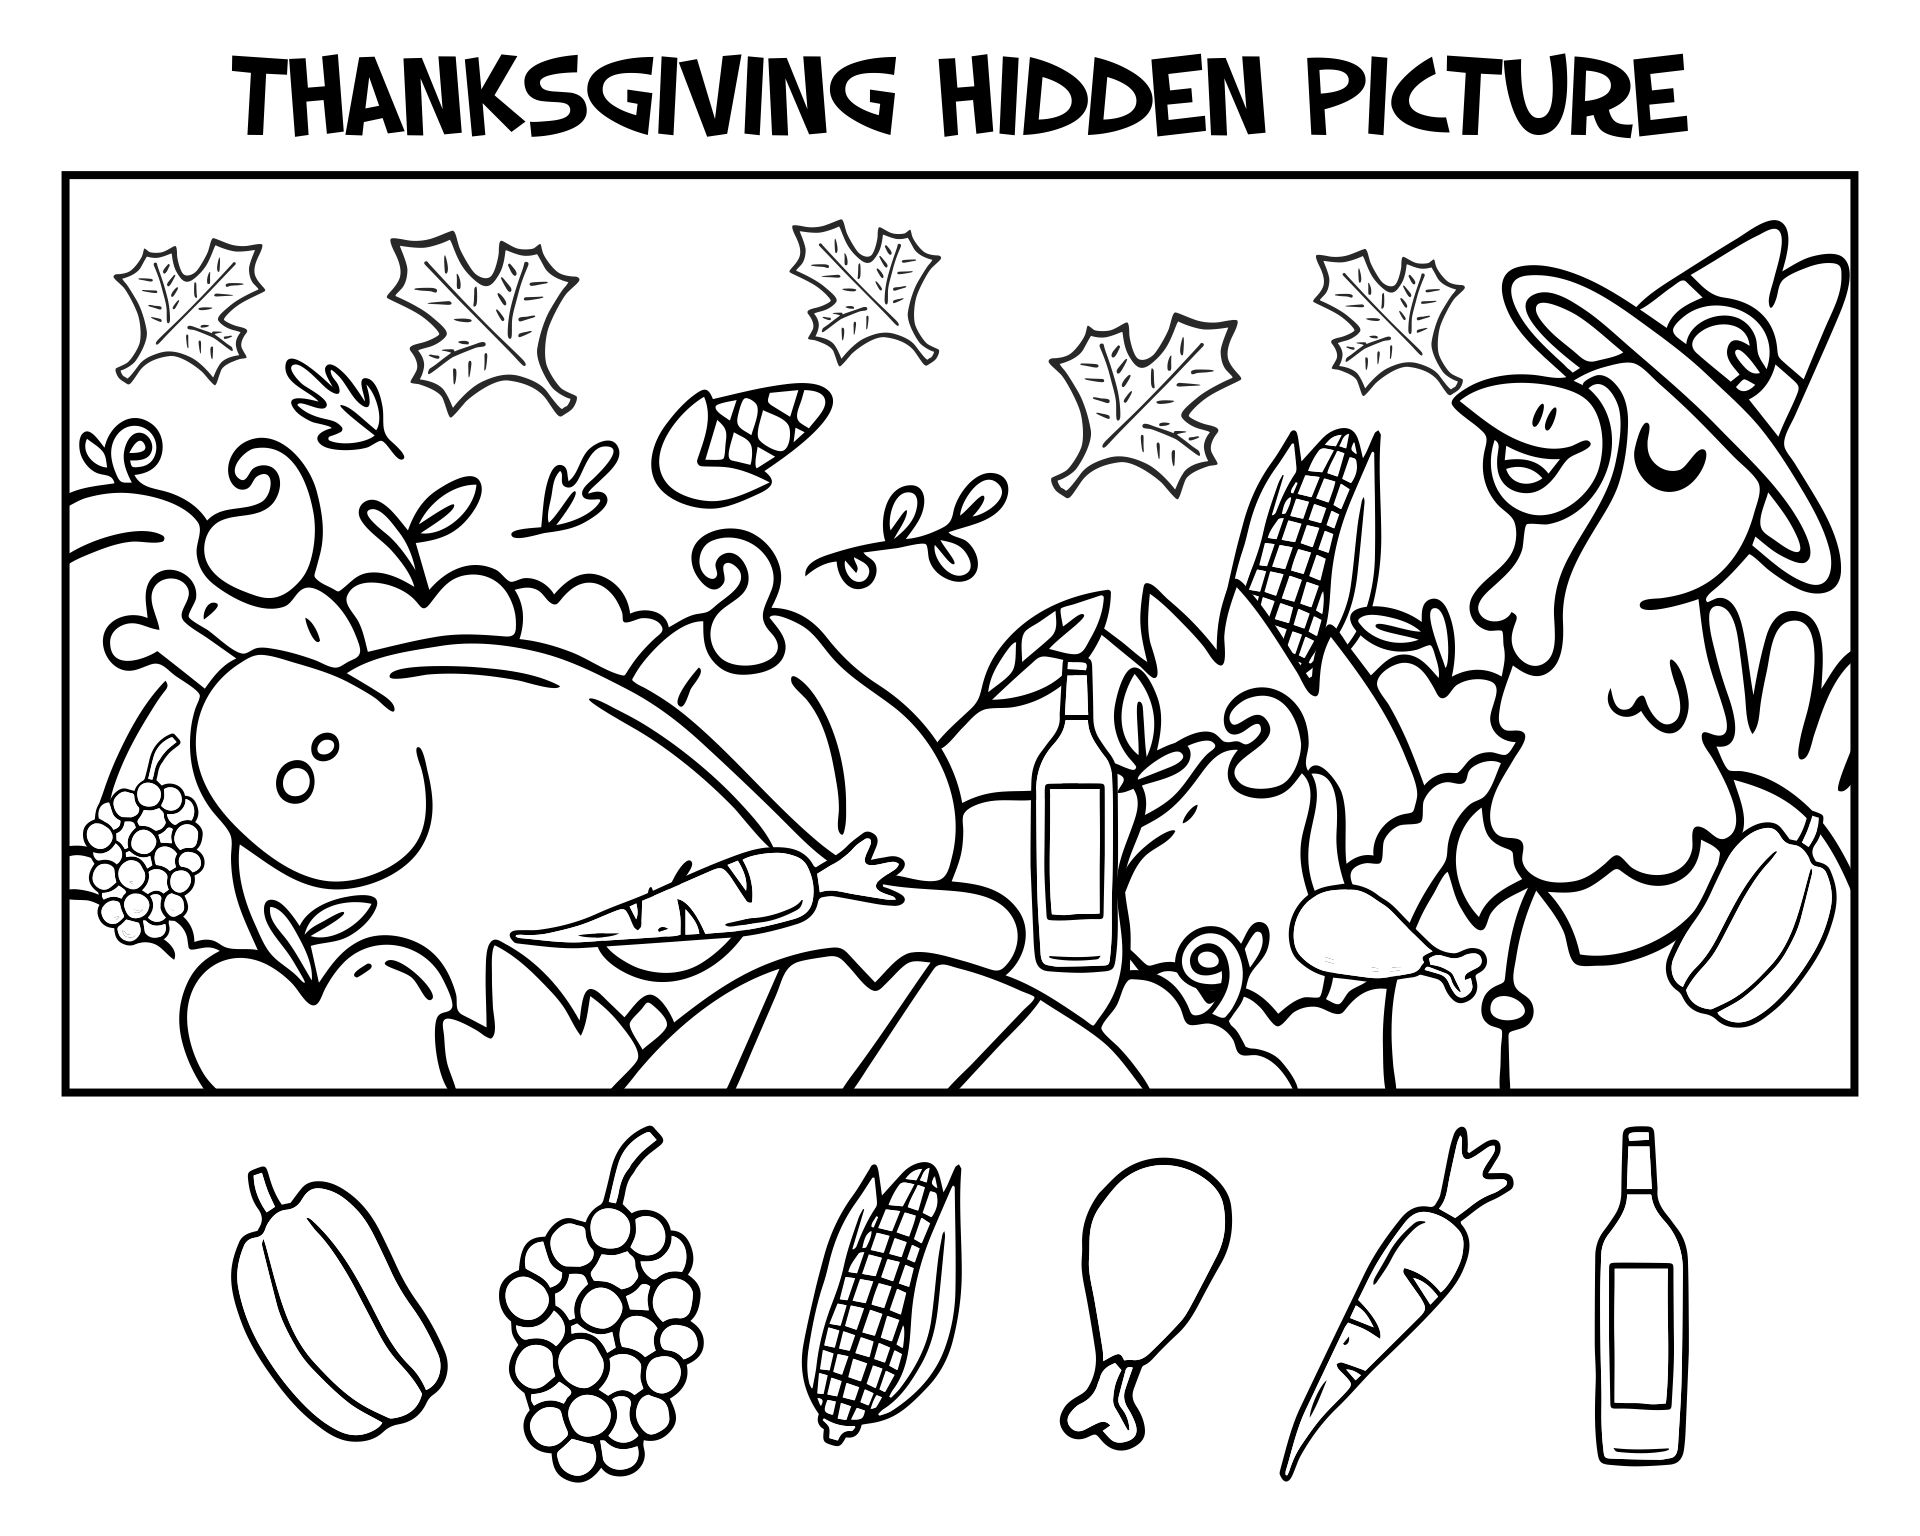 Printable Thanksgiving Hidden Picture Games_85521